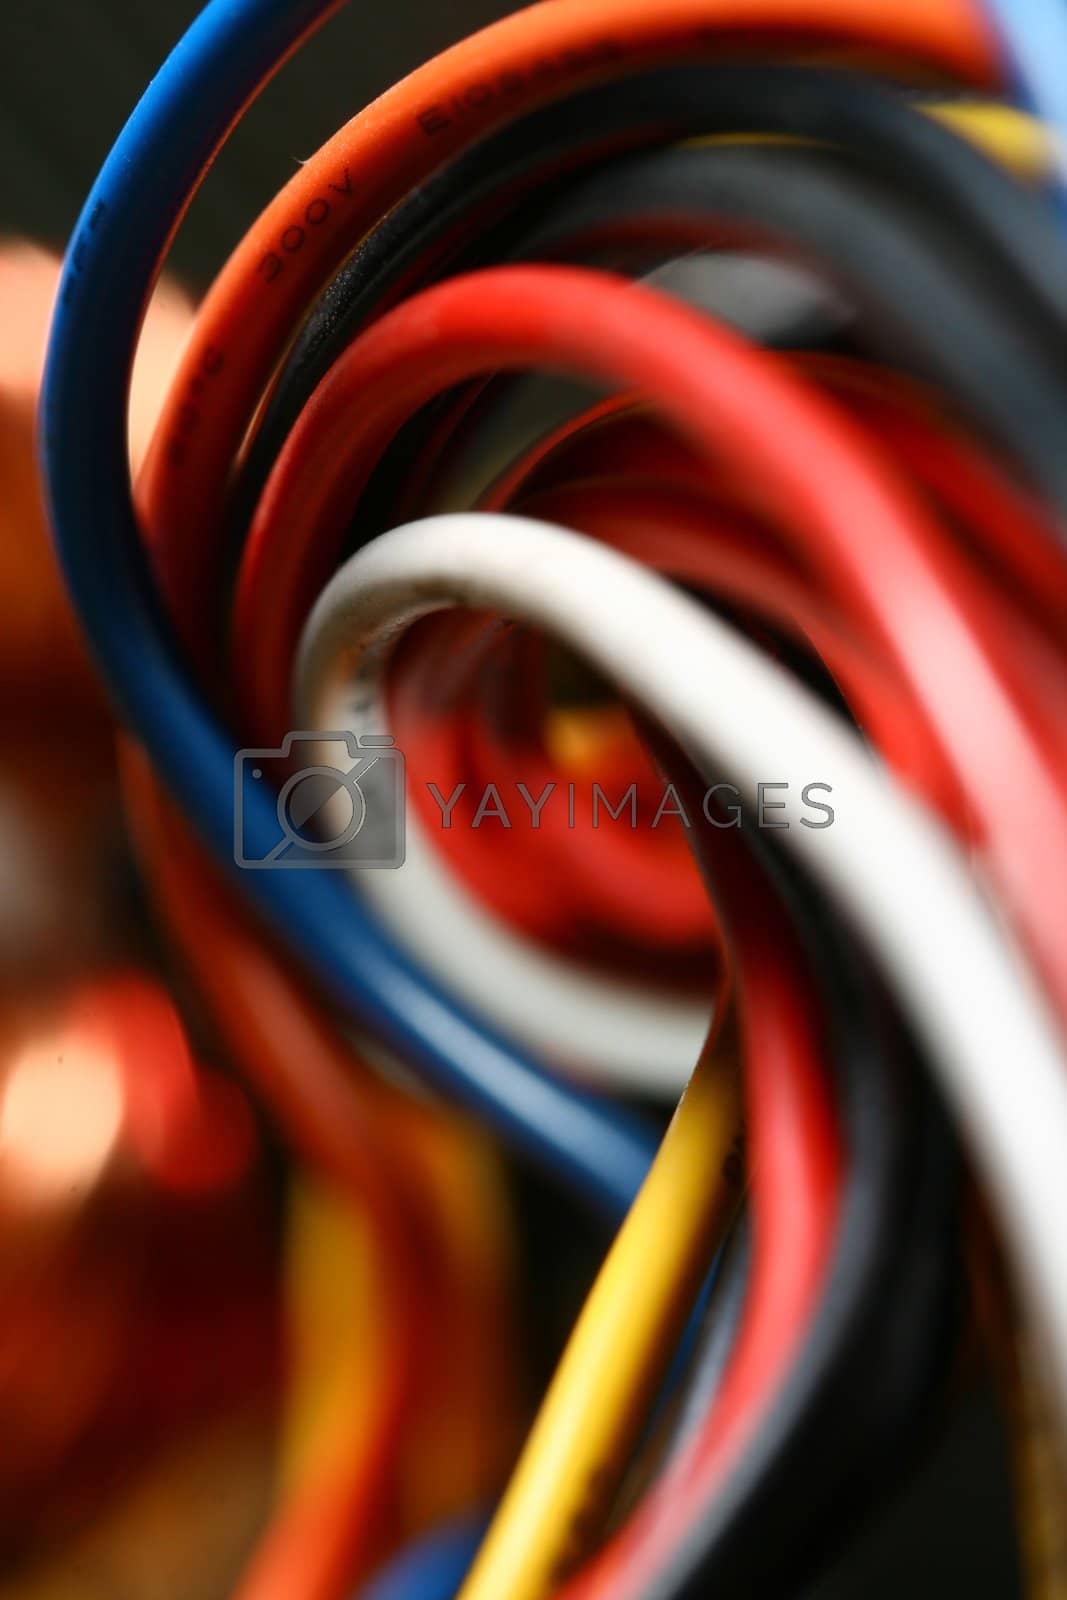 Royalty free image of colored wire by Yellowj